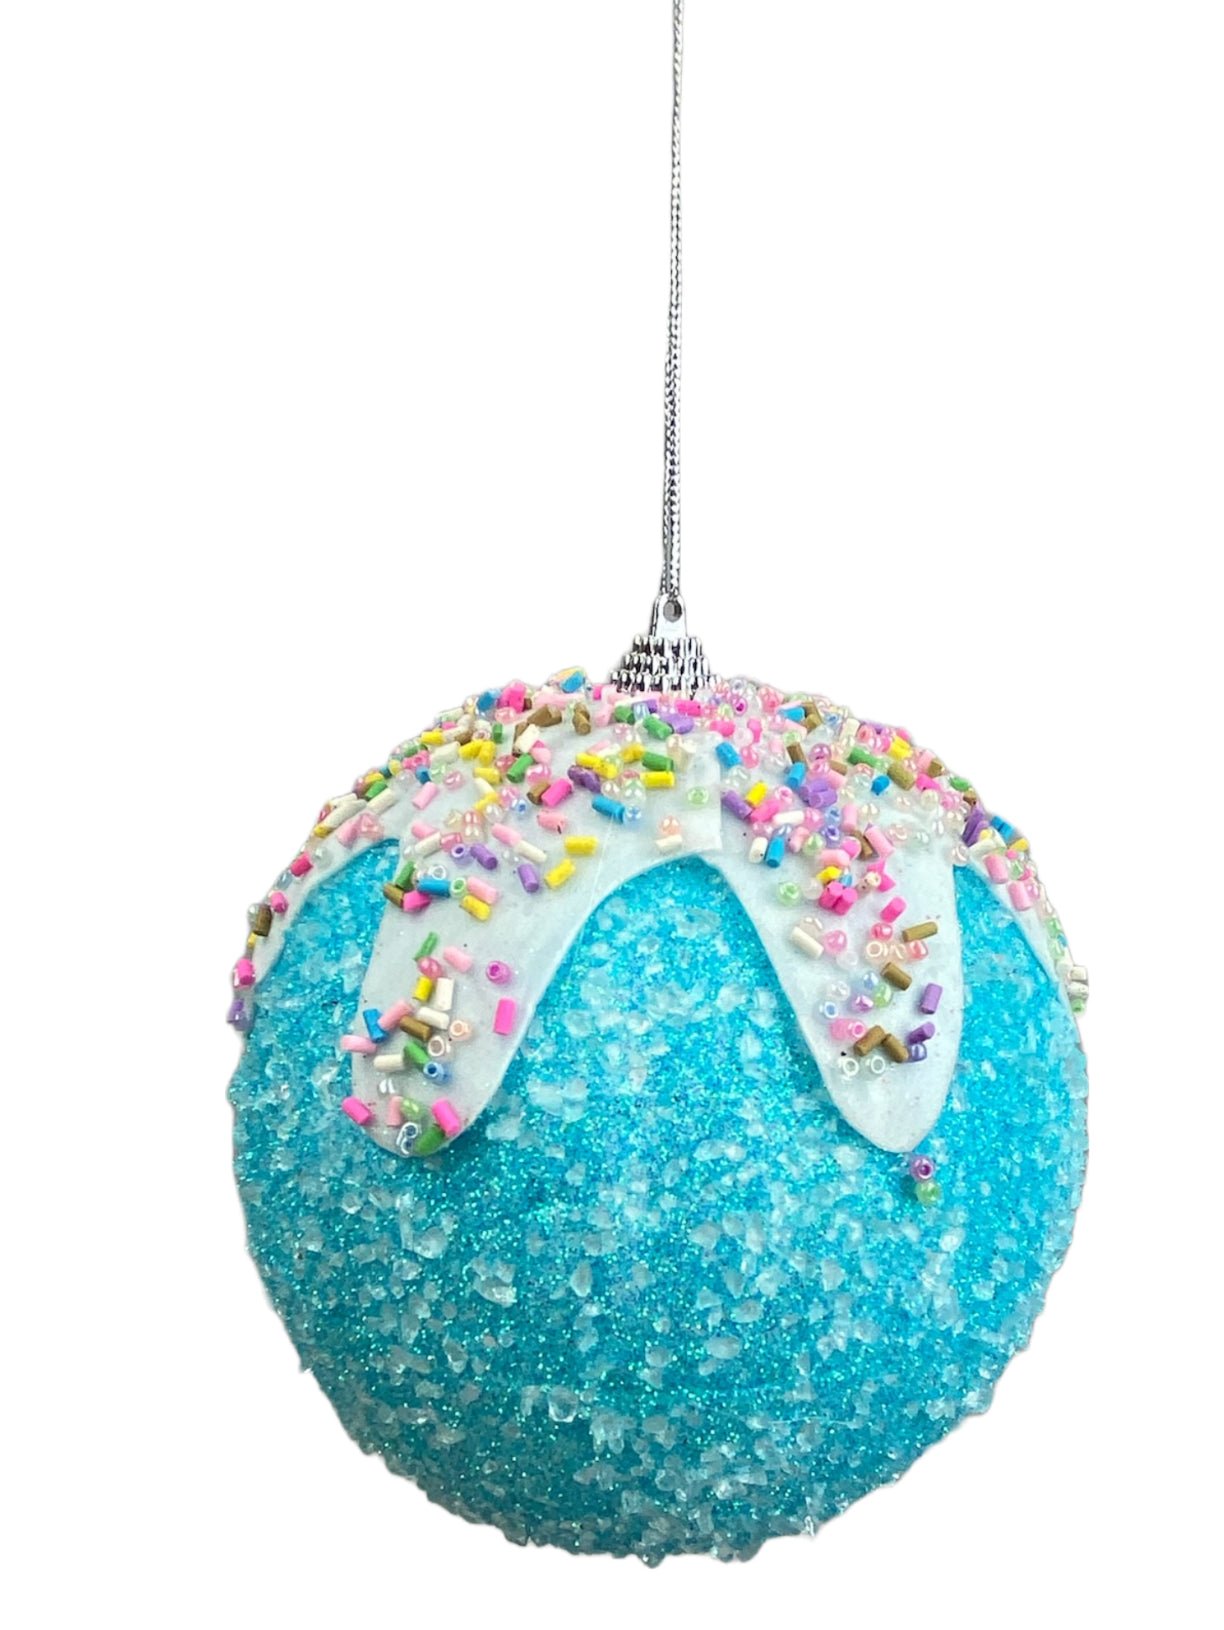 Sugared blue ornament with icing and sprinkles 5” - Greenery Market85789BL